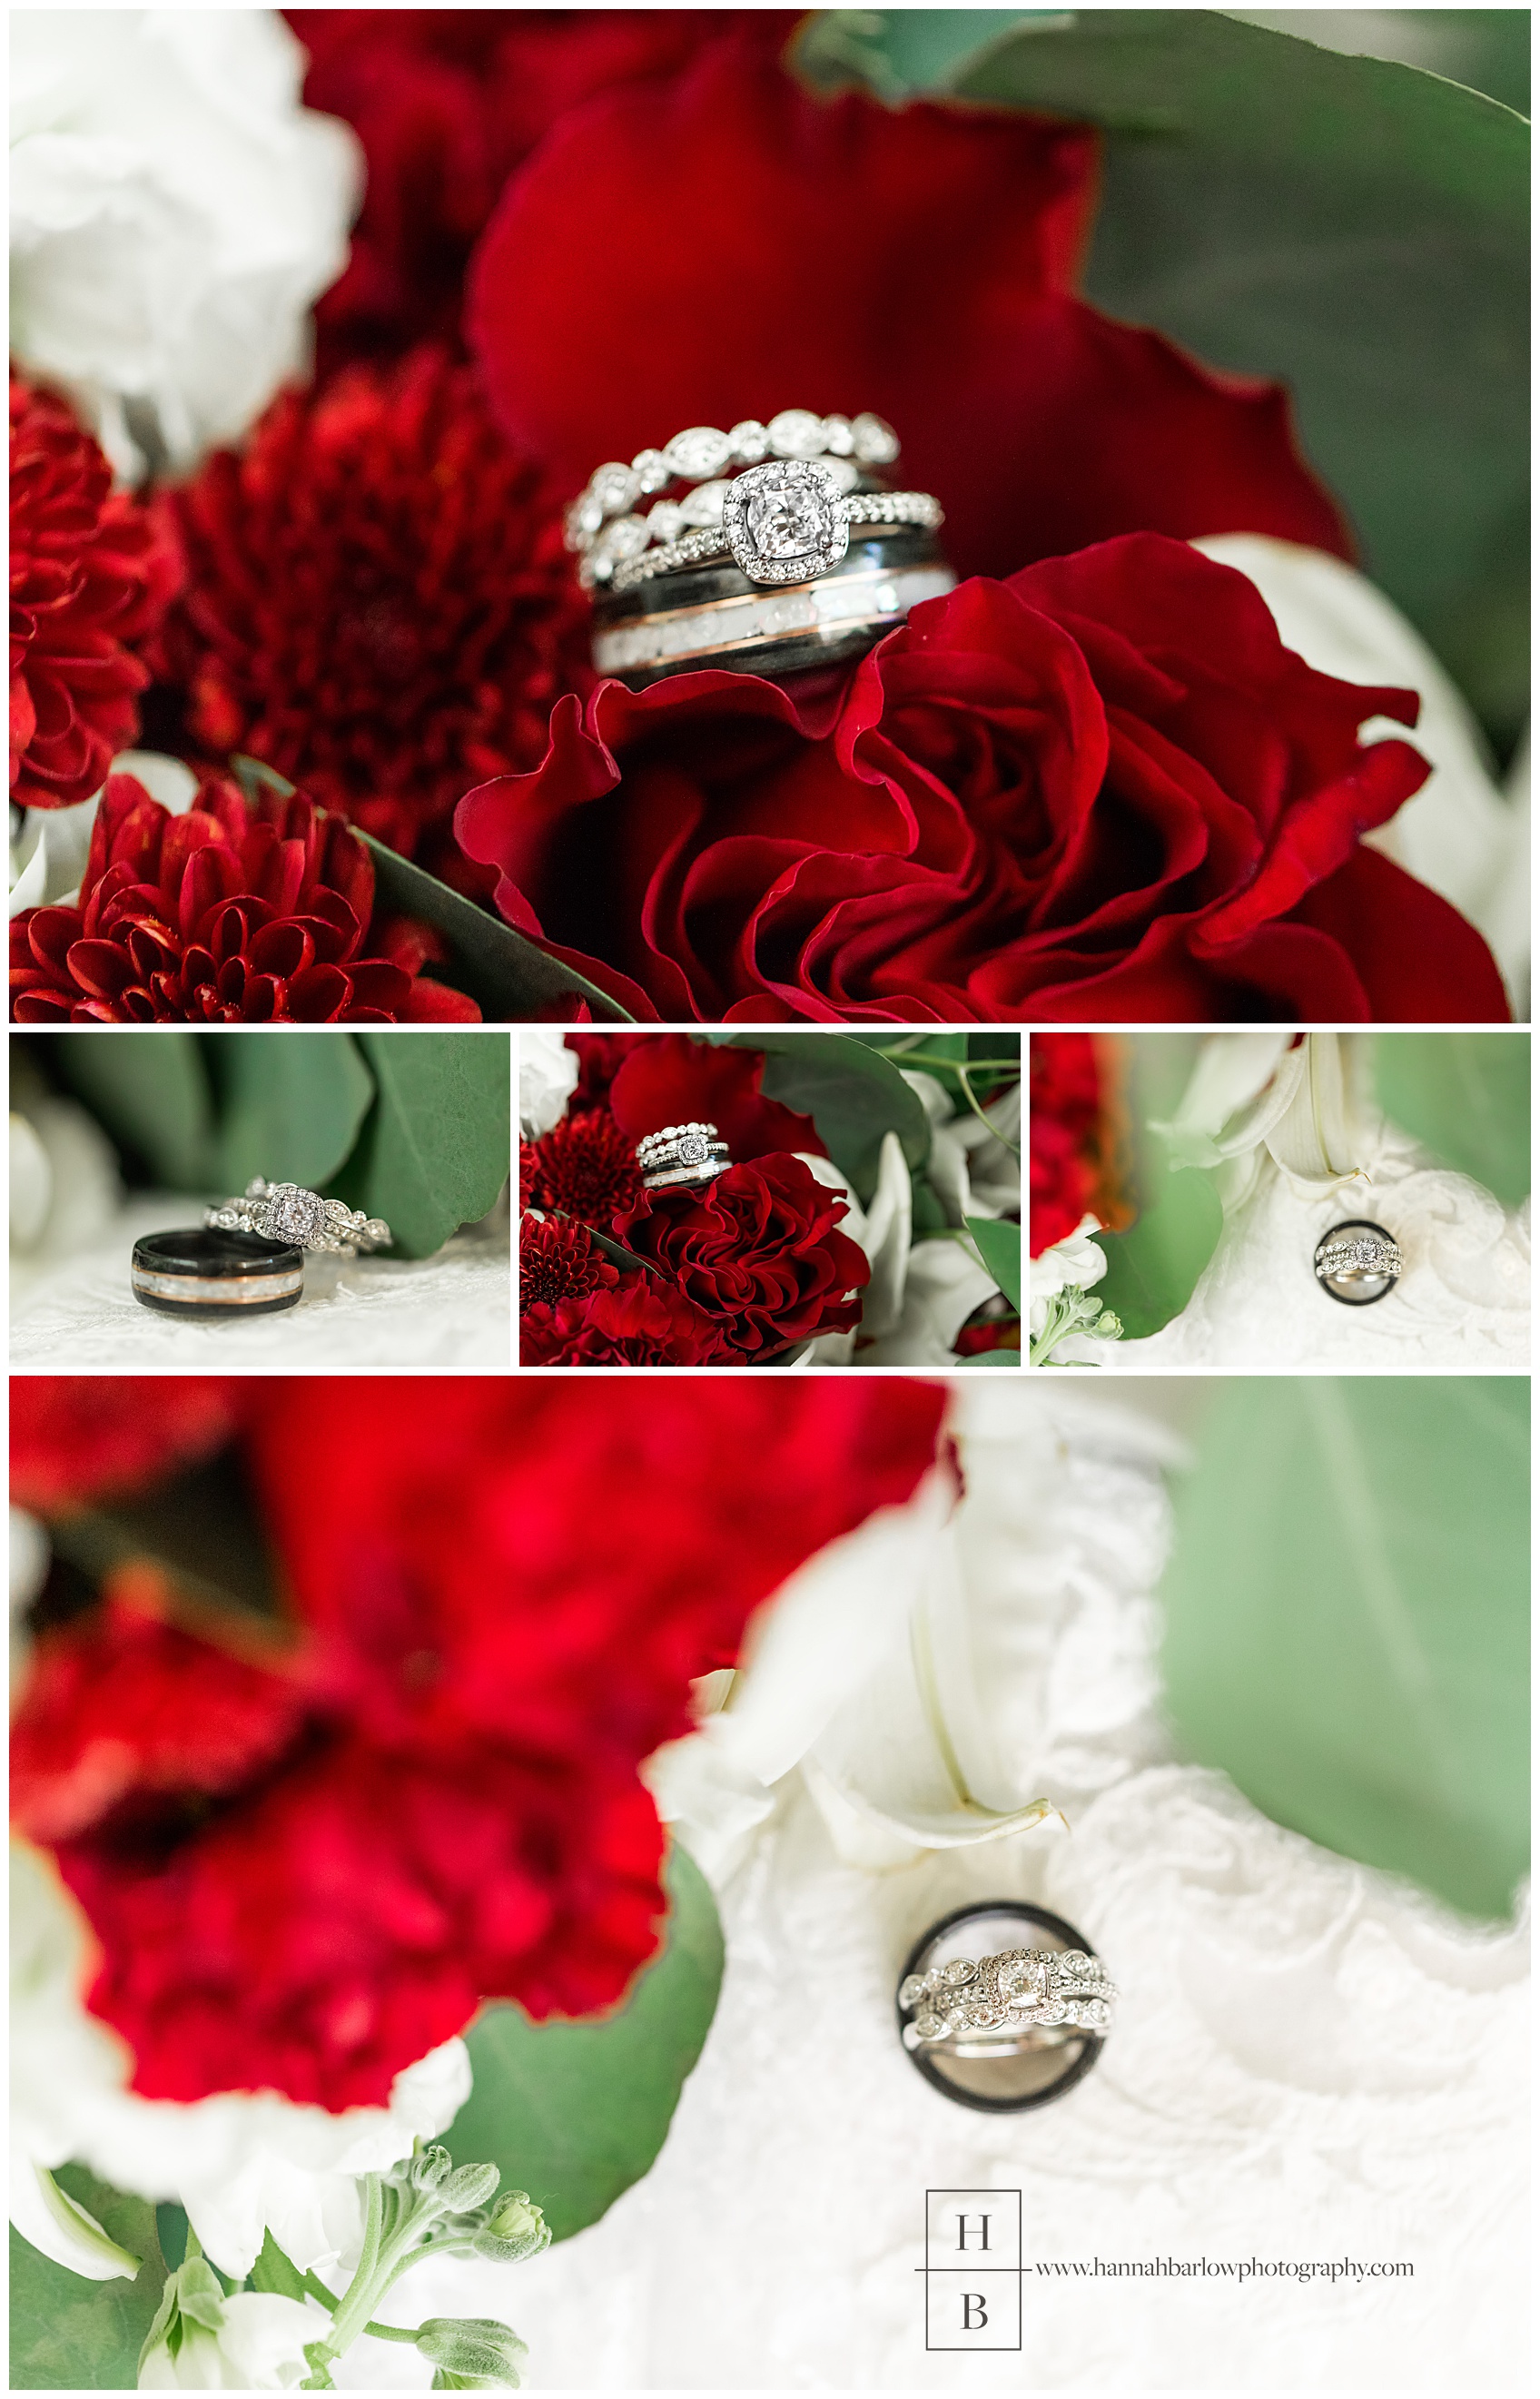 Wedding Ring Photos White and Red Flowers